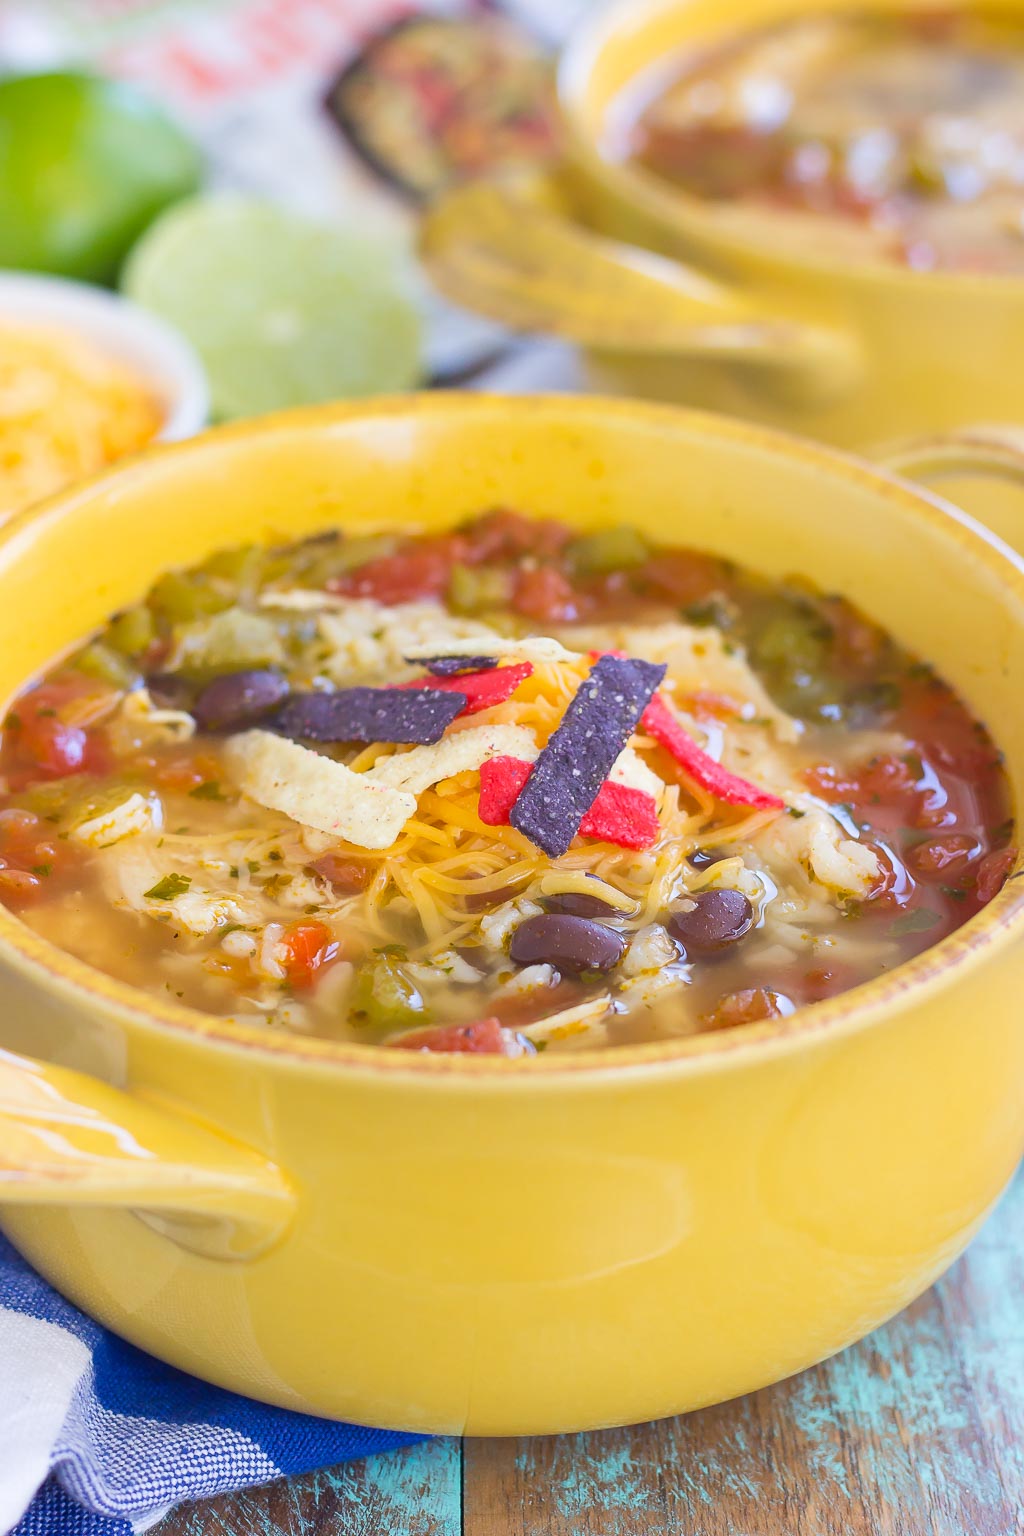 This One Pot Chicken Fajita Soup filled with your favorite fajita flavors, made in one pot, and ready in just 30 minutes. This soup is an easy and delicious weeknight meal that will have you coming back for more!